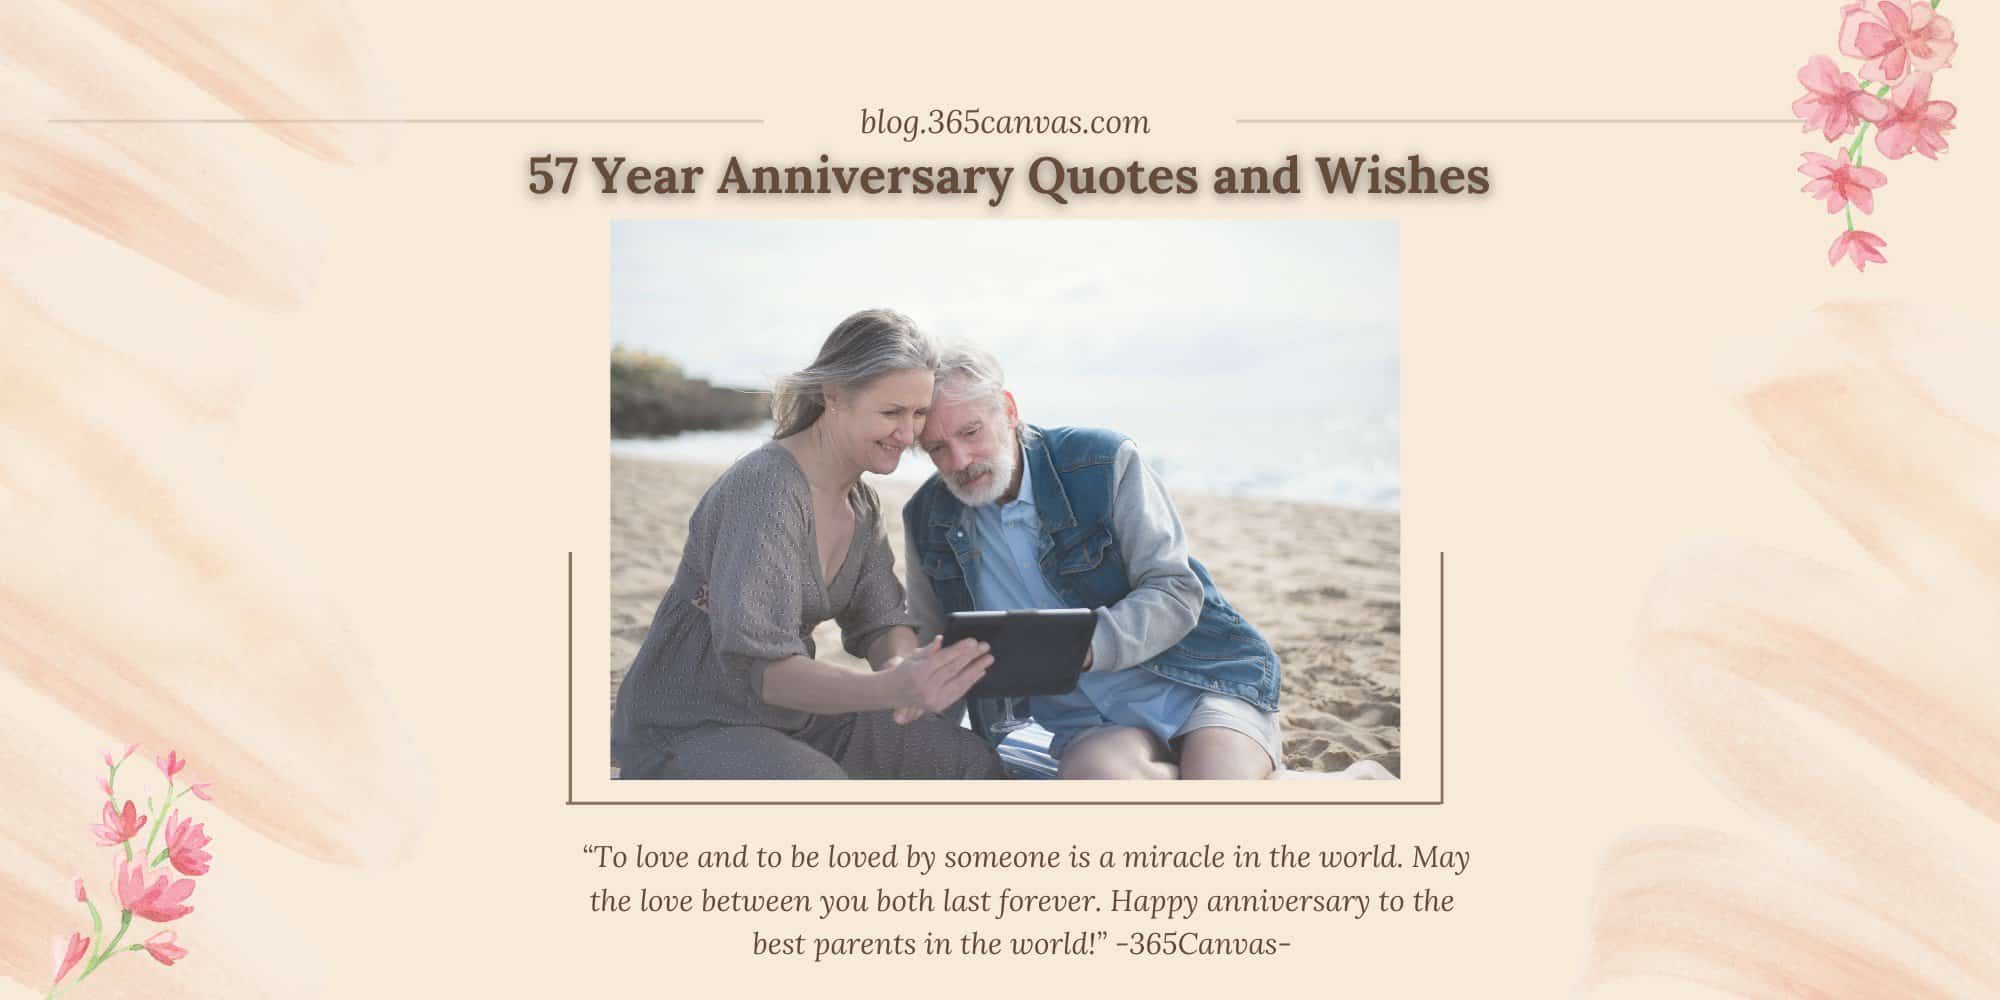 170+ Happy 57th Year Night Anniversary Quotes, Wishes, Messages with Image